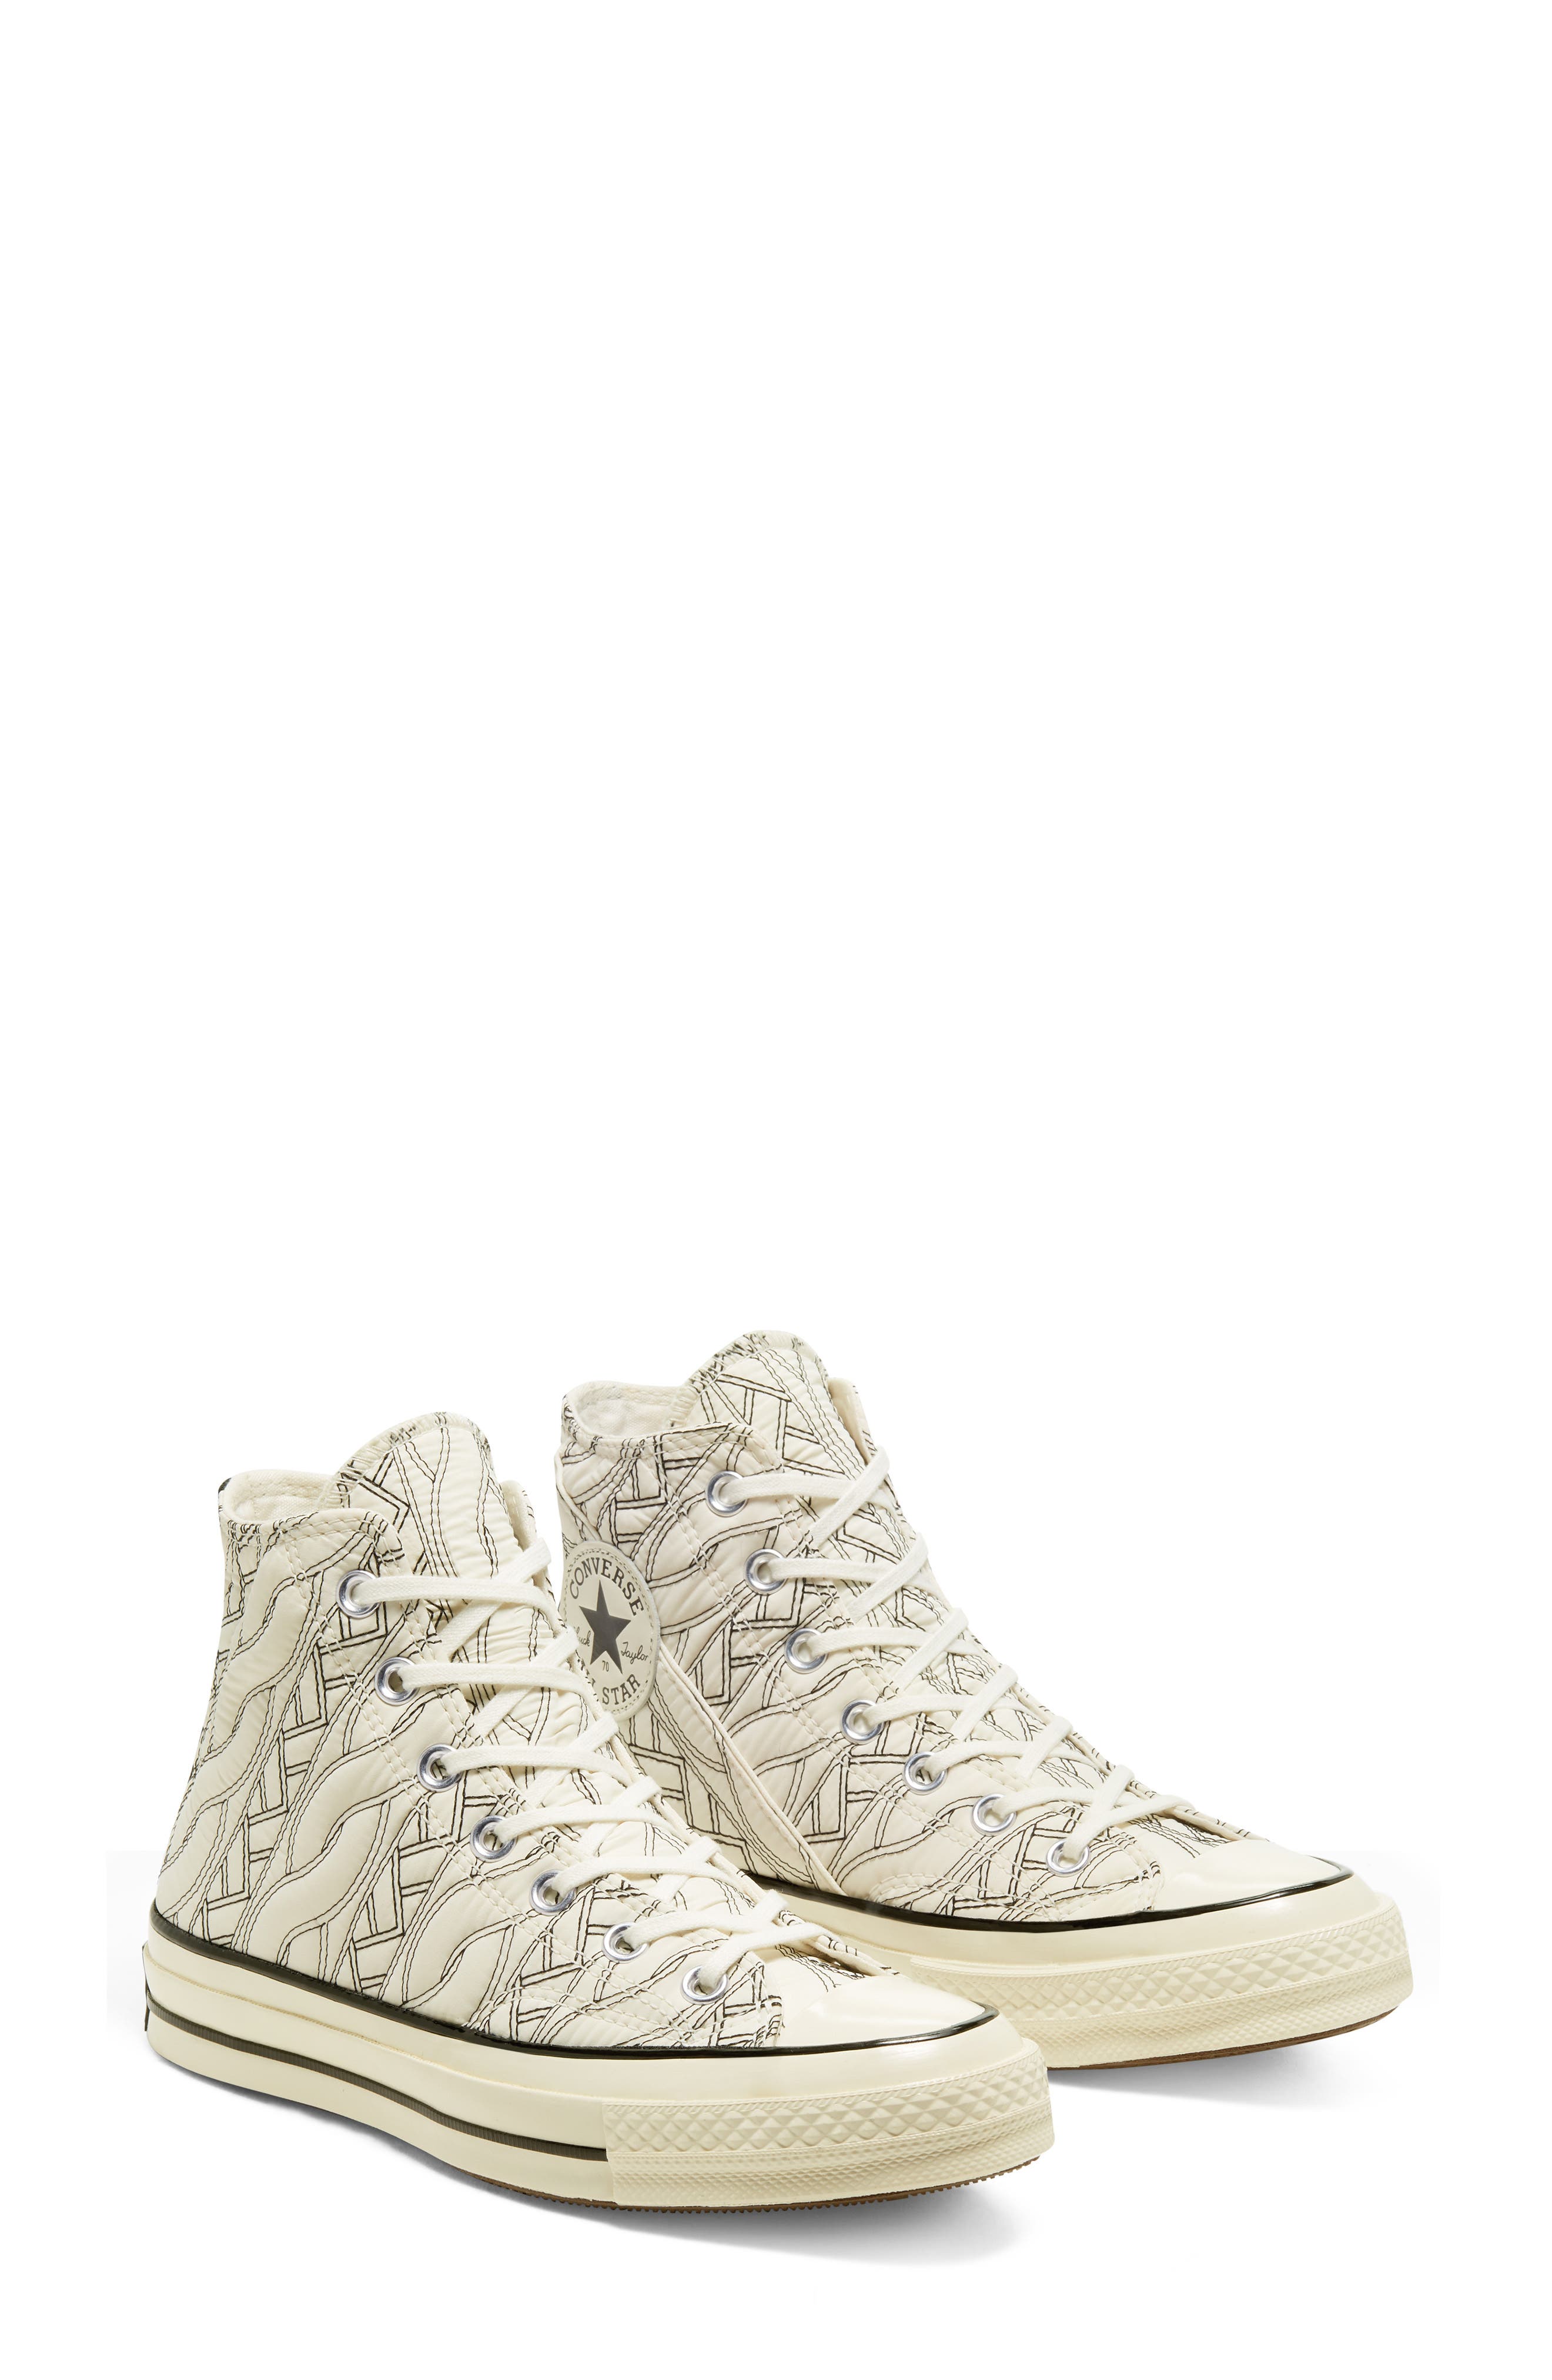 converse chuck taylor all star quilted ox w